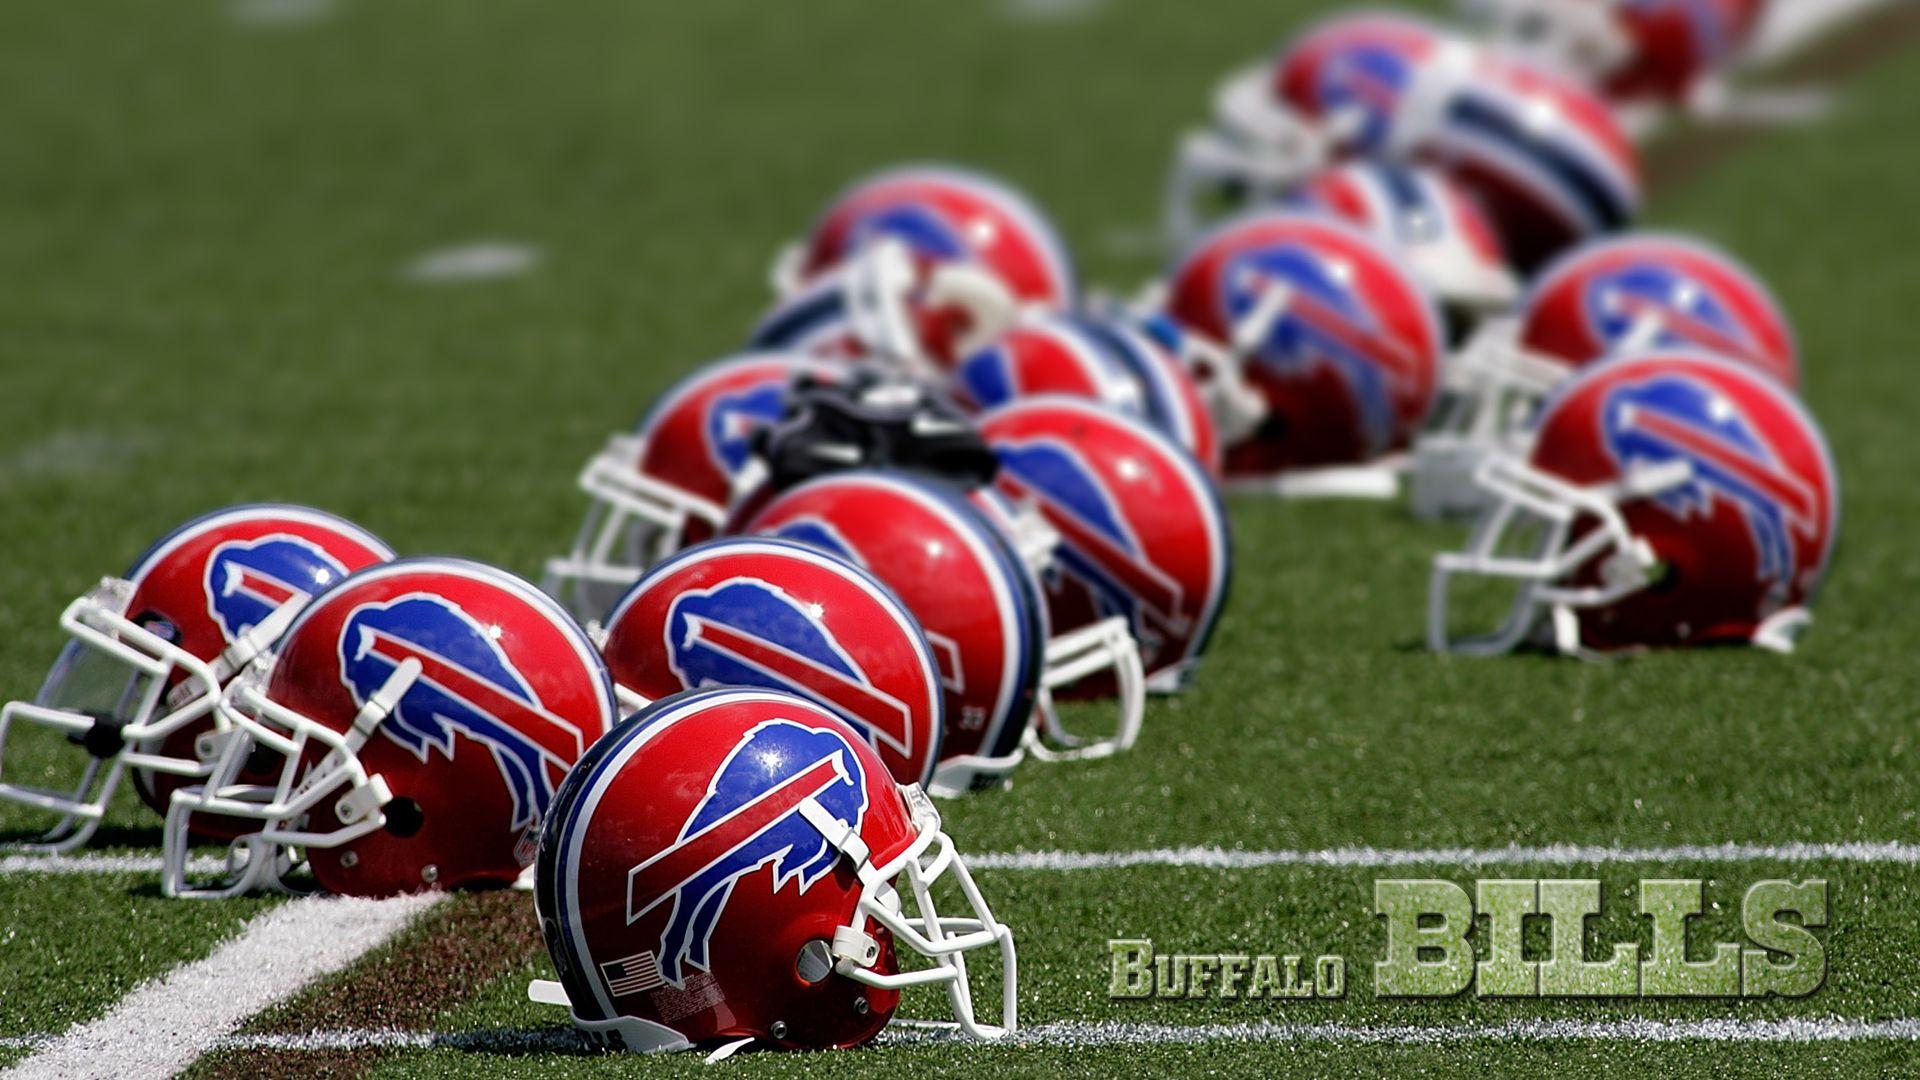 Buffalo Bills Wallpapers Image Photos Pictures Backgrounds